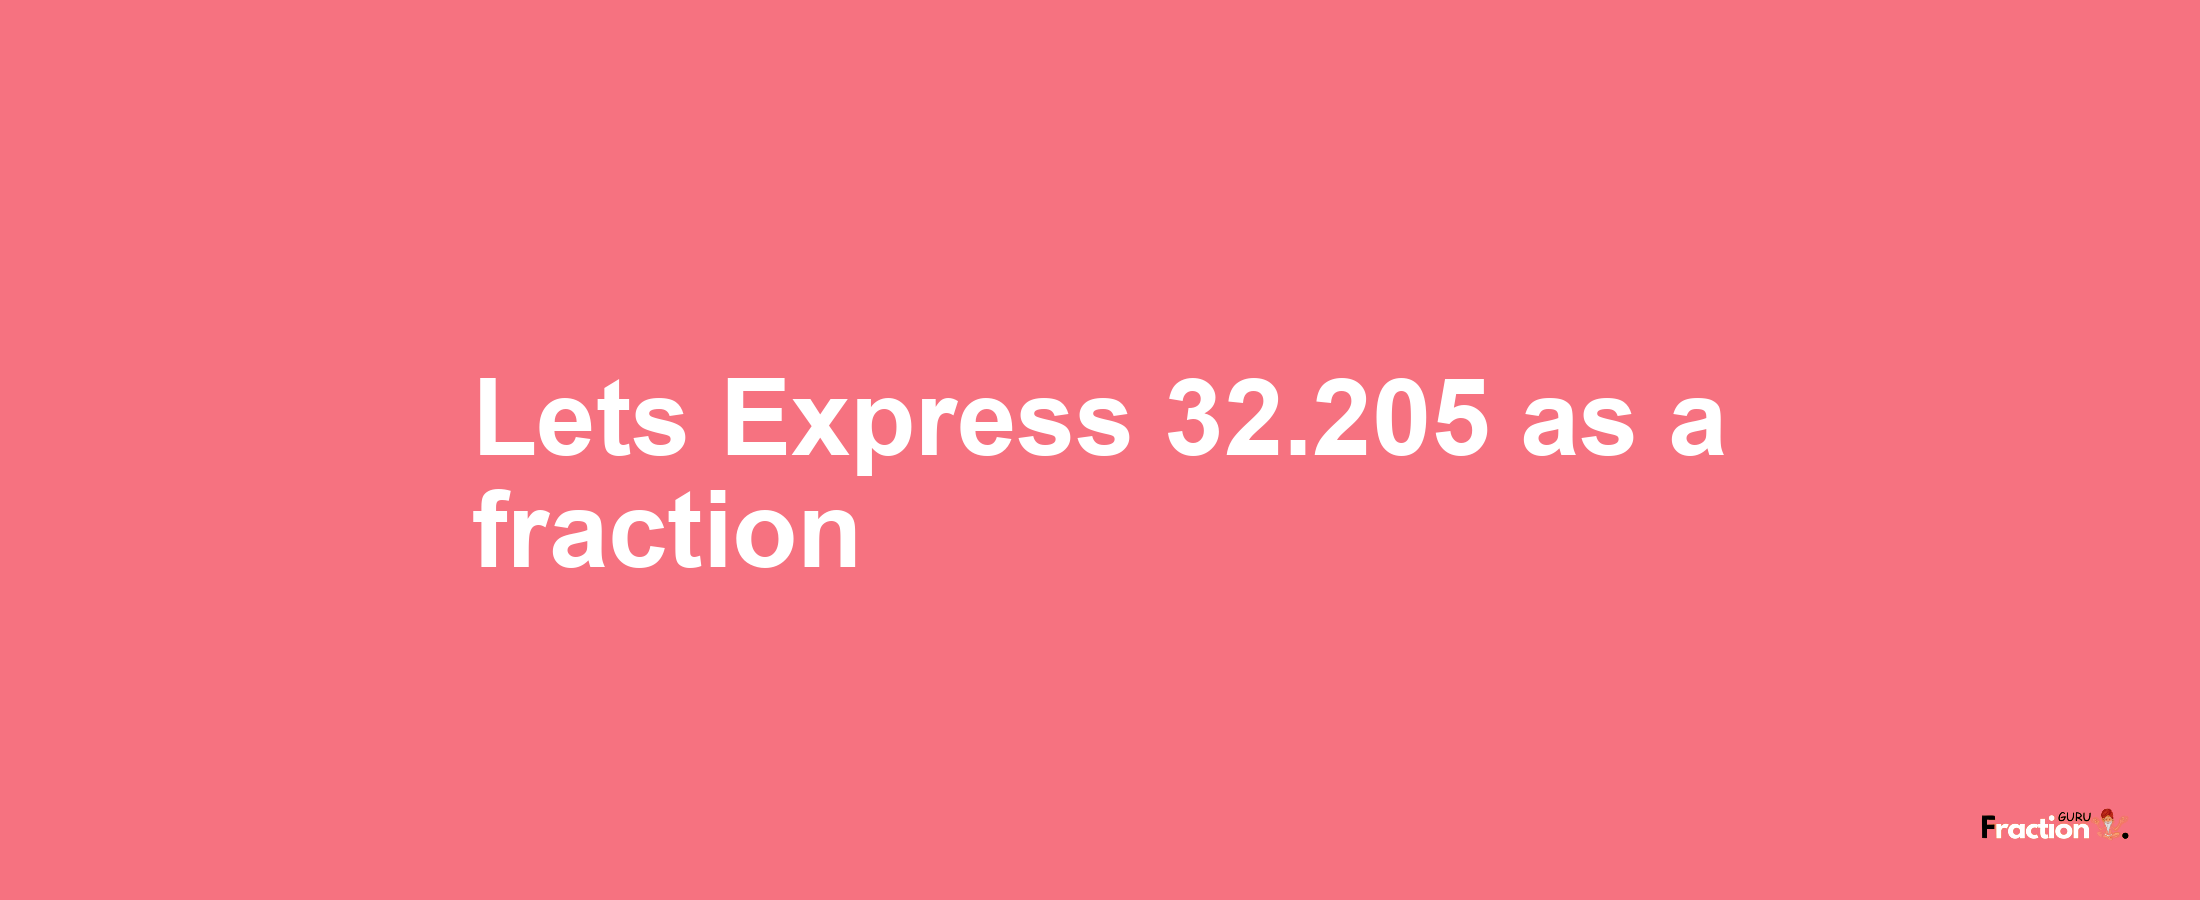 Lets Express 32.205 as afraction